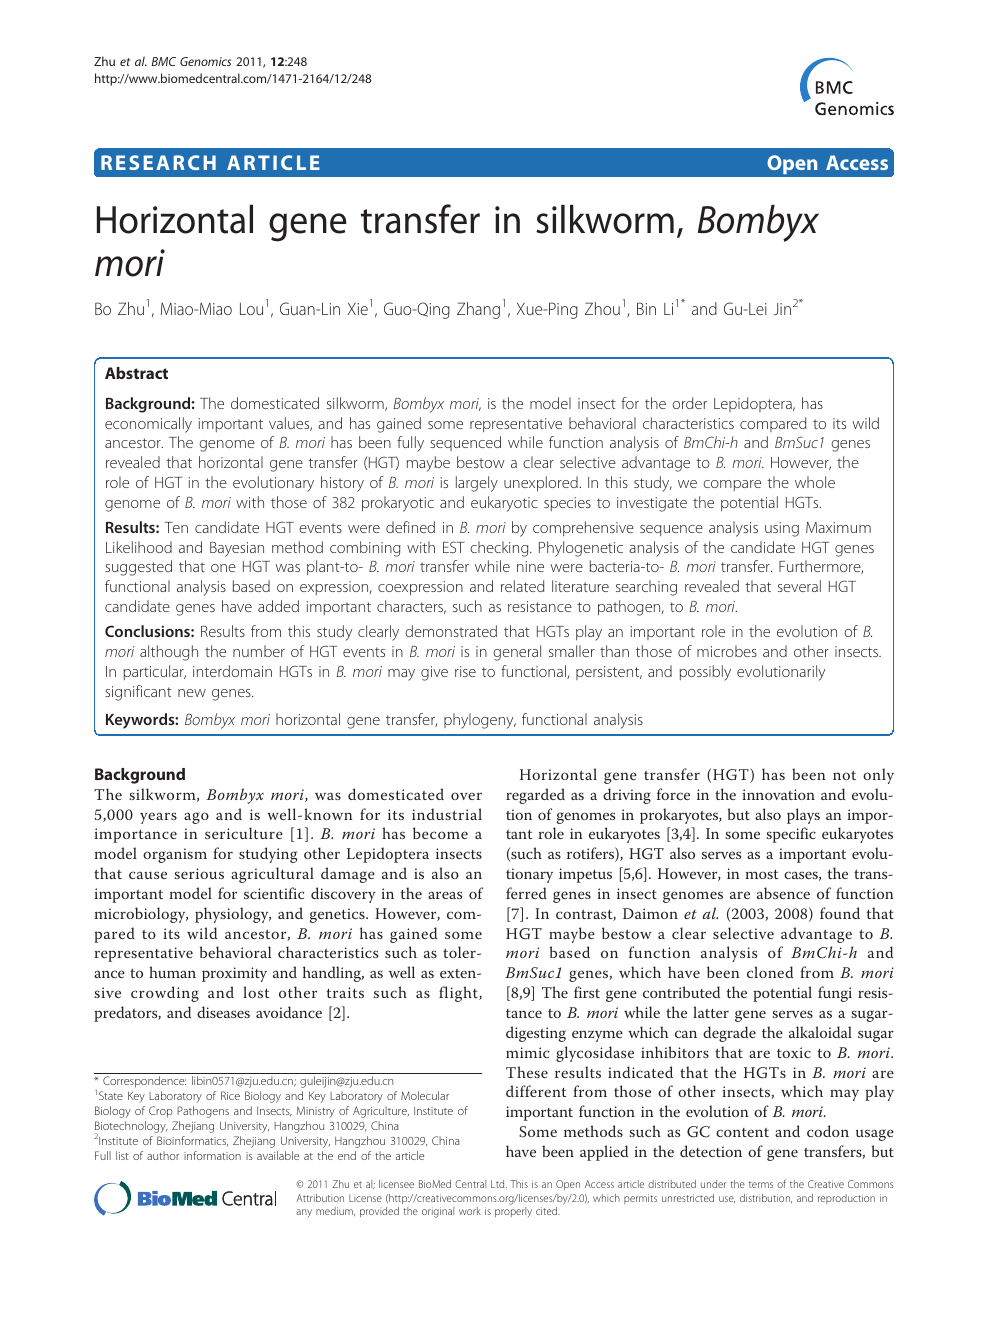 Horizontal Gene Transfer In Silkworm Bombyx Mori Topic Of Research Paper In Biological Sciences Download Scholarly Article Pdf And Read For Free On Cyberleninka Open Science Hub